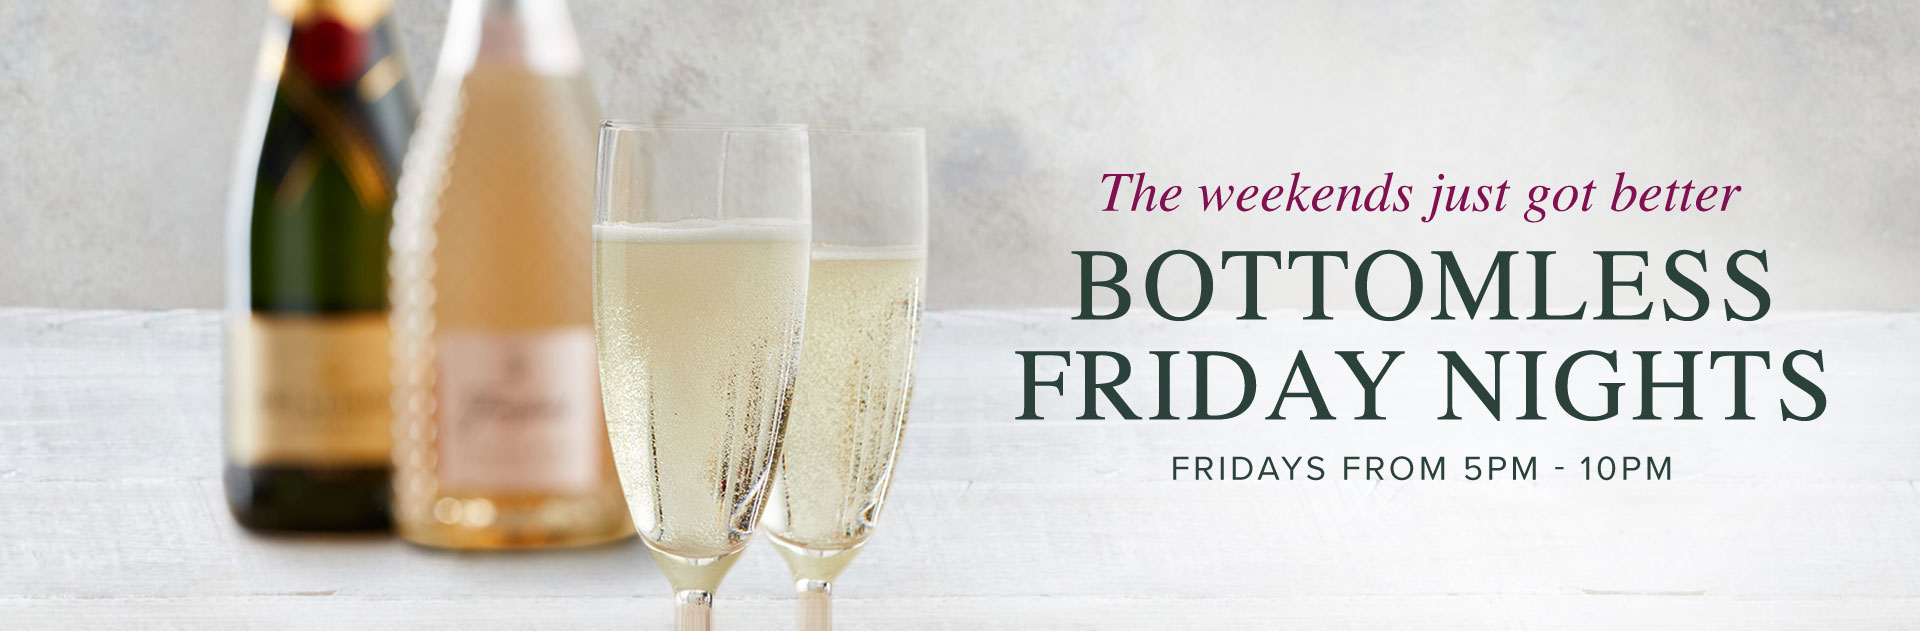 Bottomless Friday at The Ardleigh